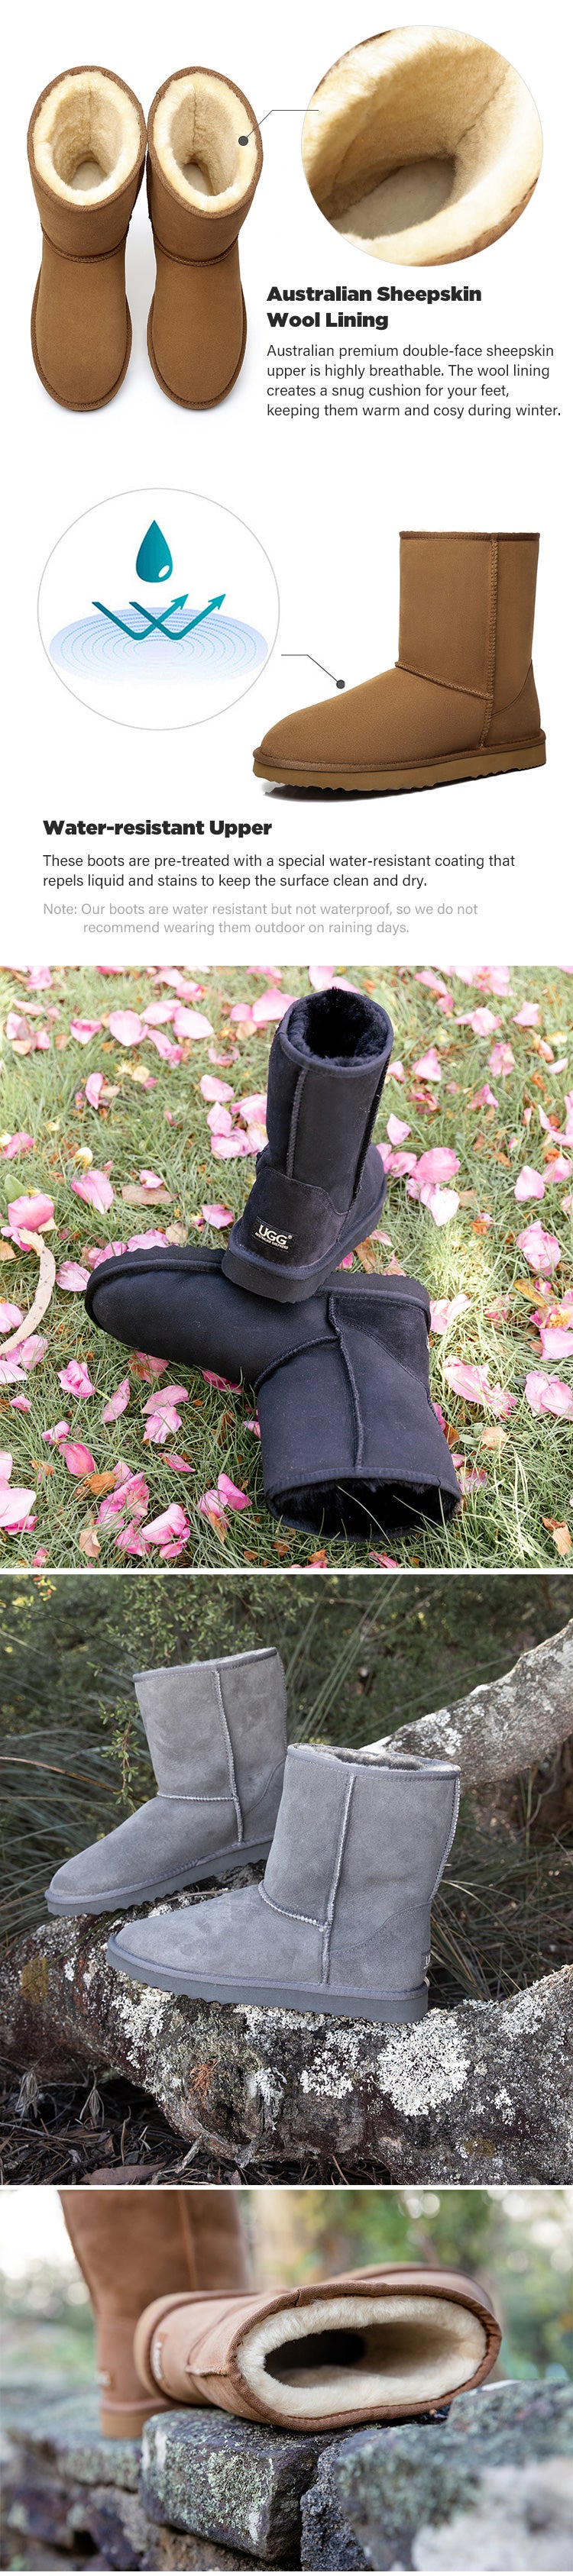 Product Photos for UGG Classic Boots